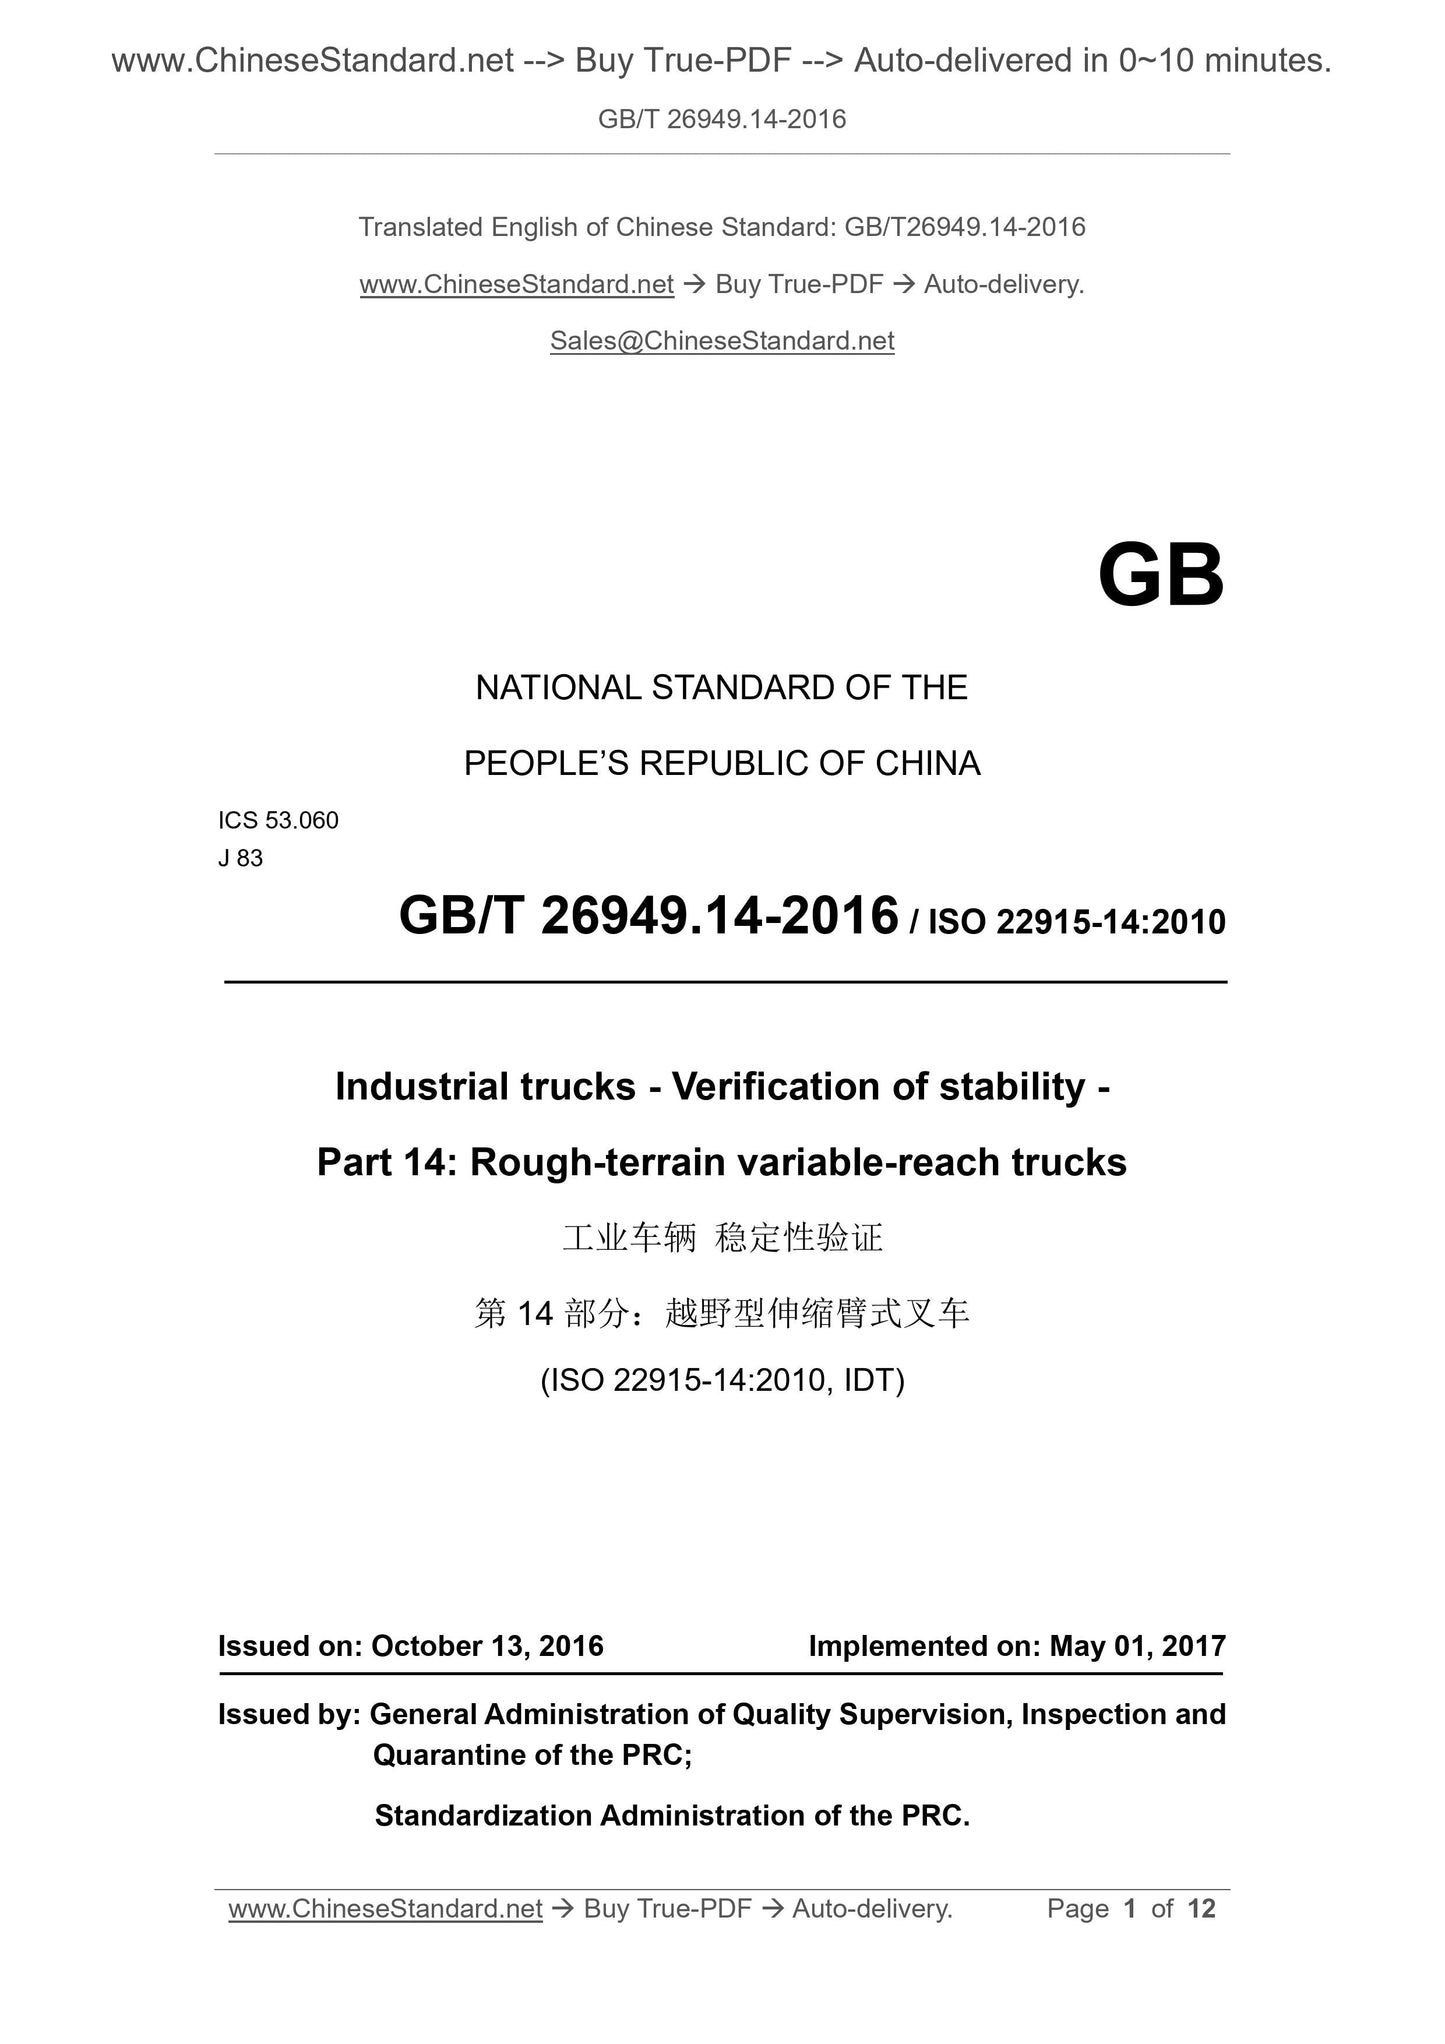 GB/T 26949.14-2016 Page 1